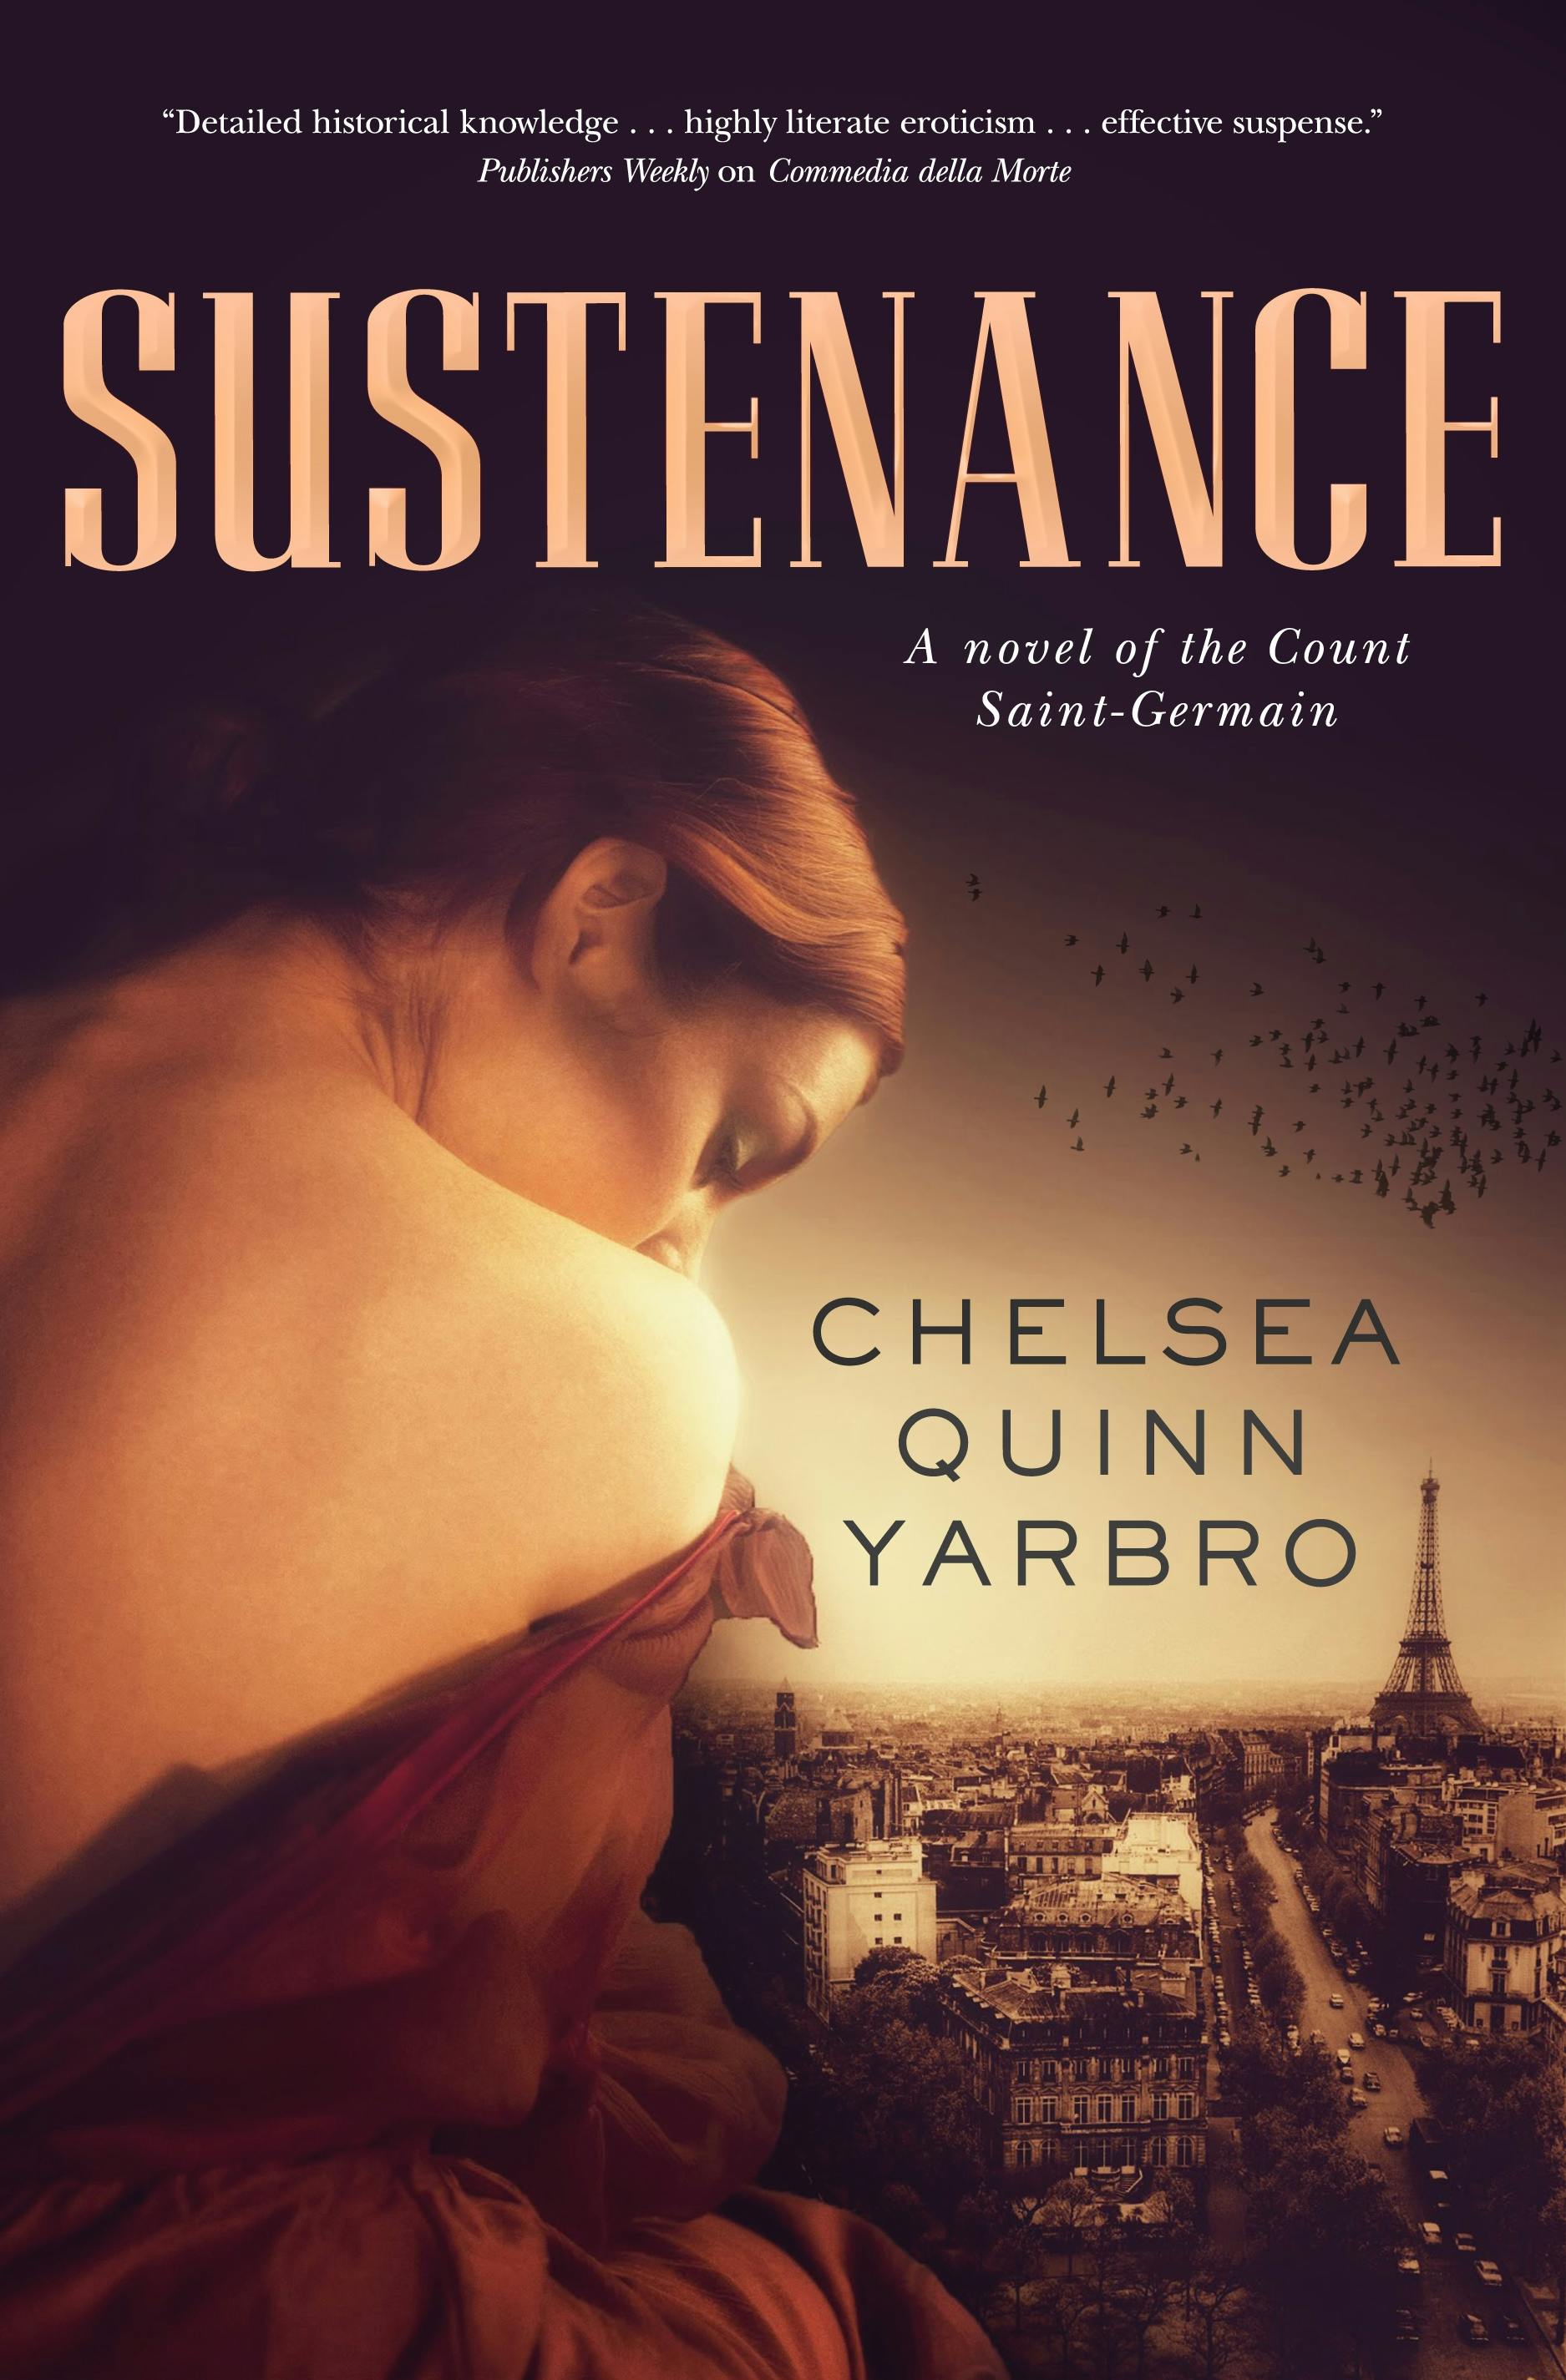 Cover for the book titled as: Sustenance